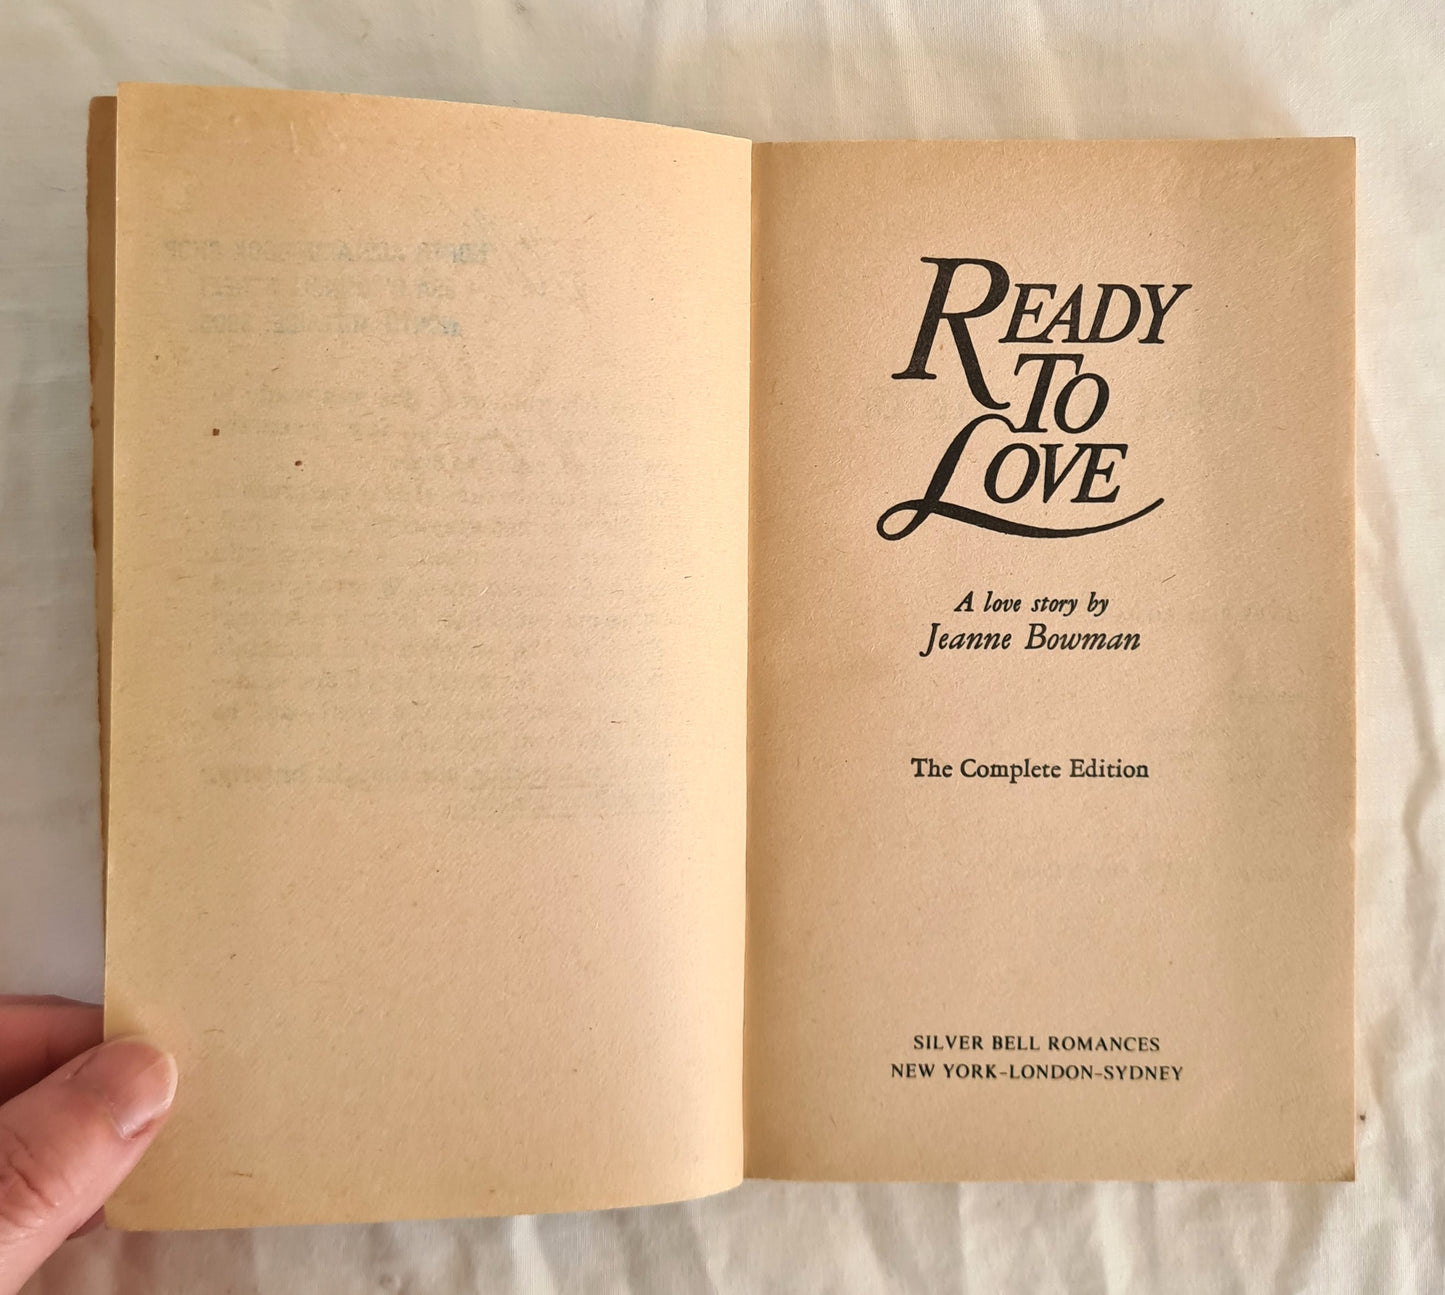 Ready To Love by Jeanne Bowman